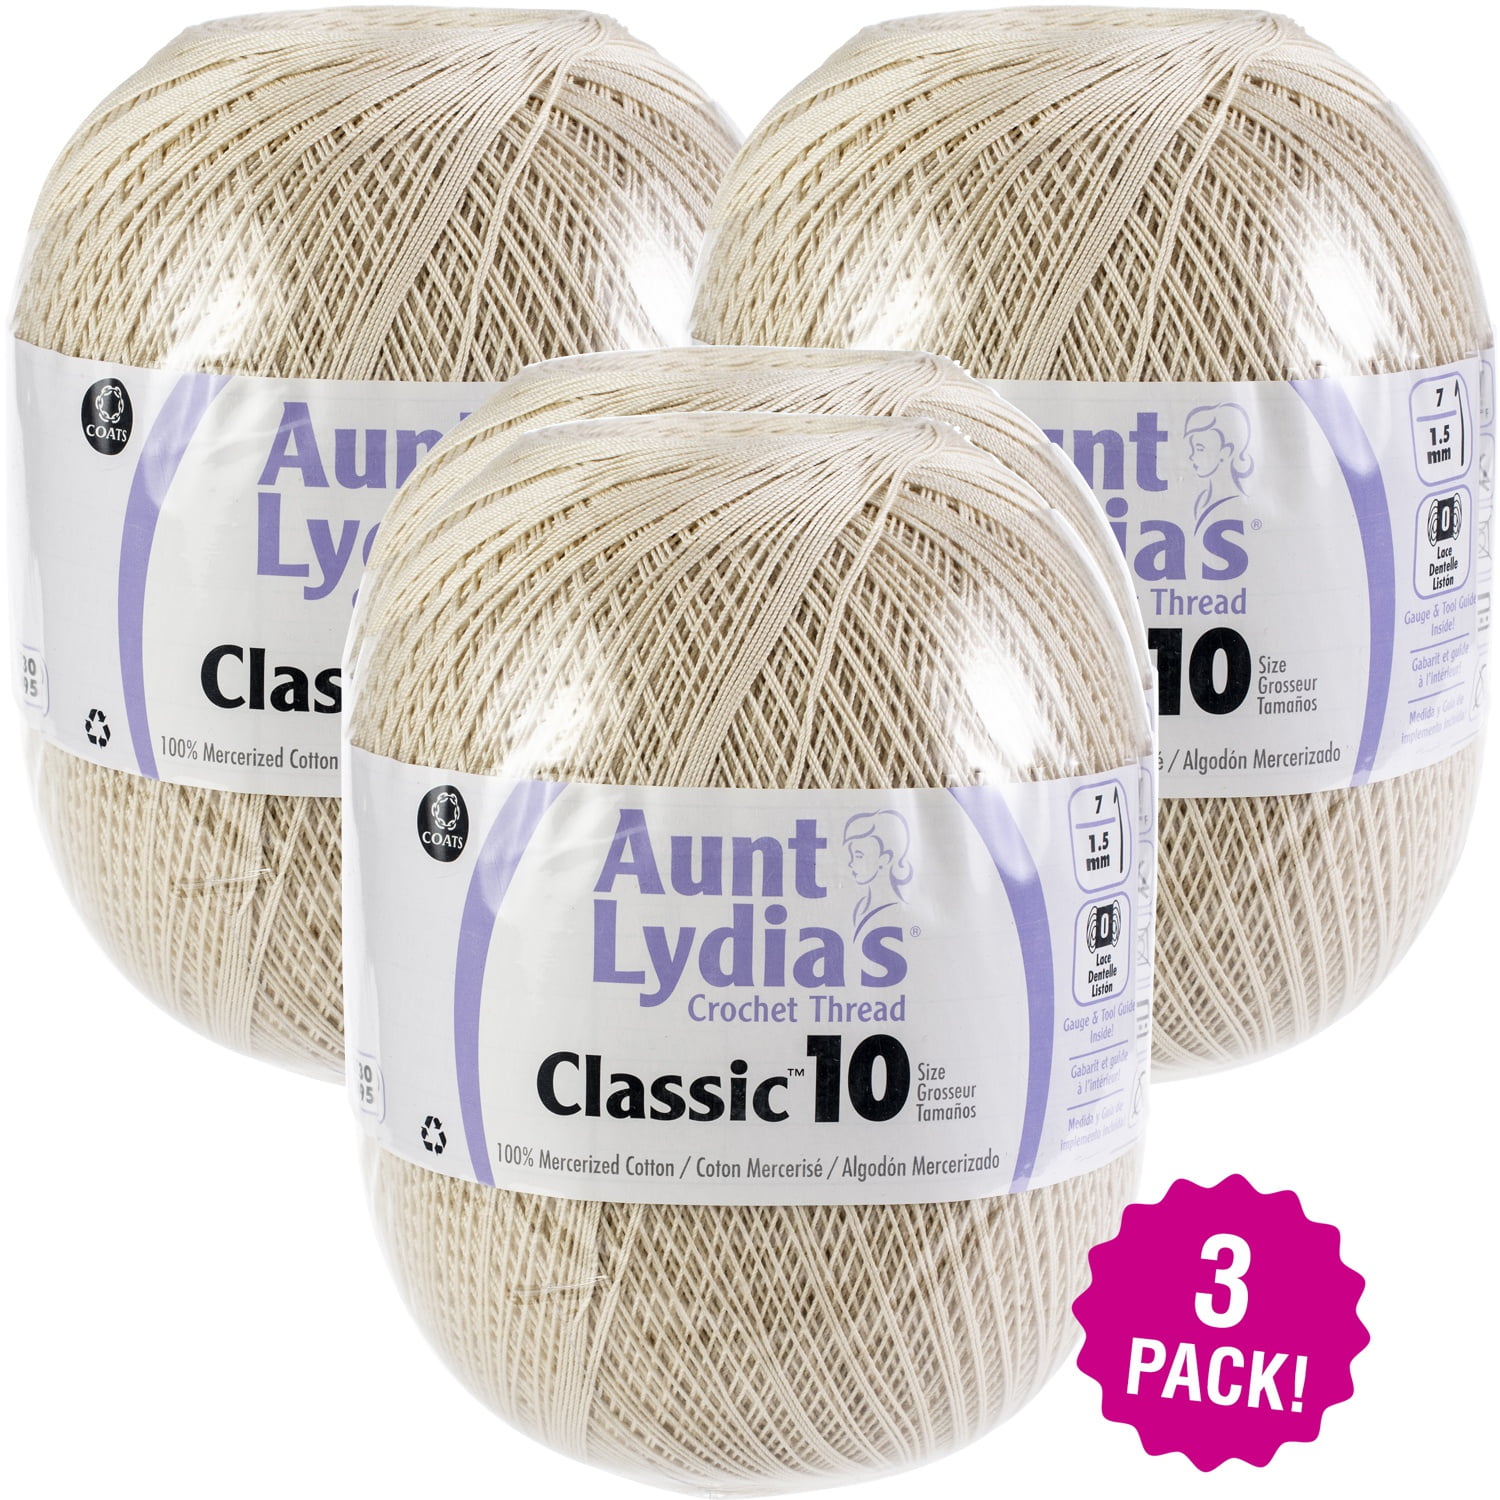 Aunt Lydia's Classic Crochet Thread Size 10-Navy, 1 count - Foods Co.